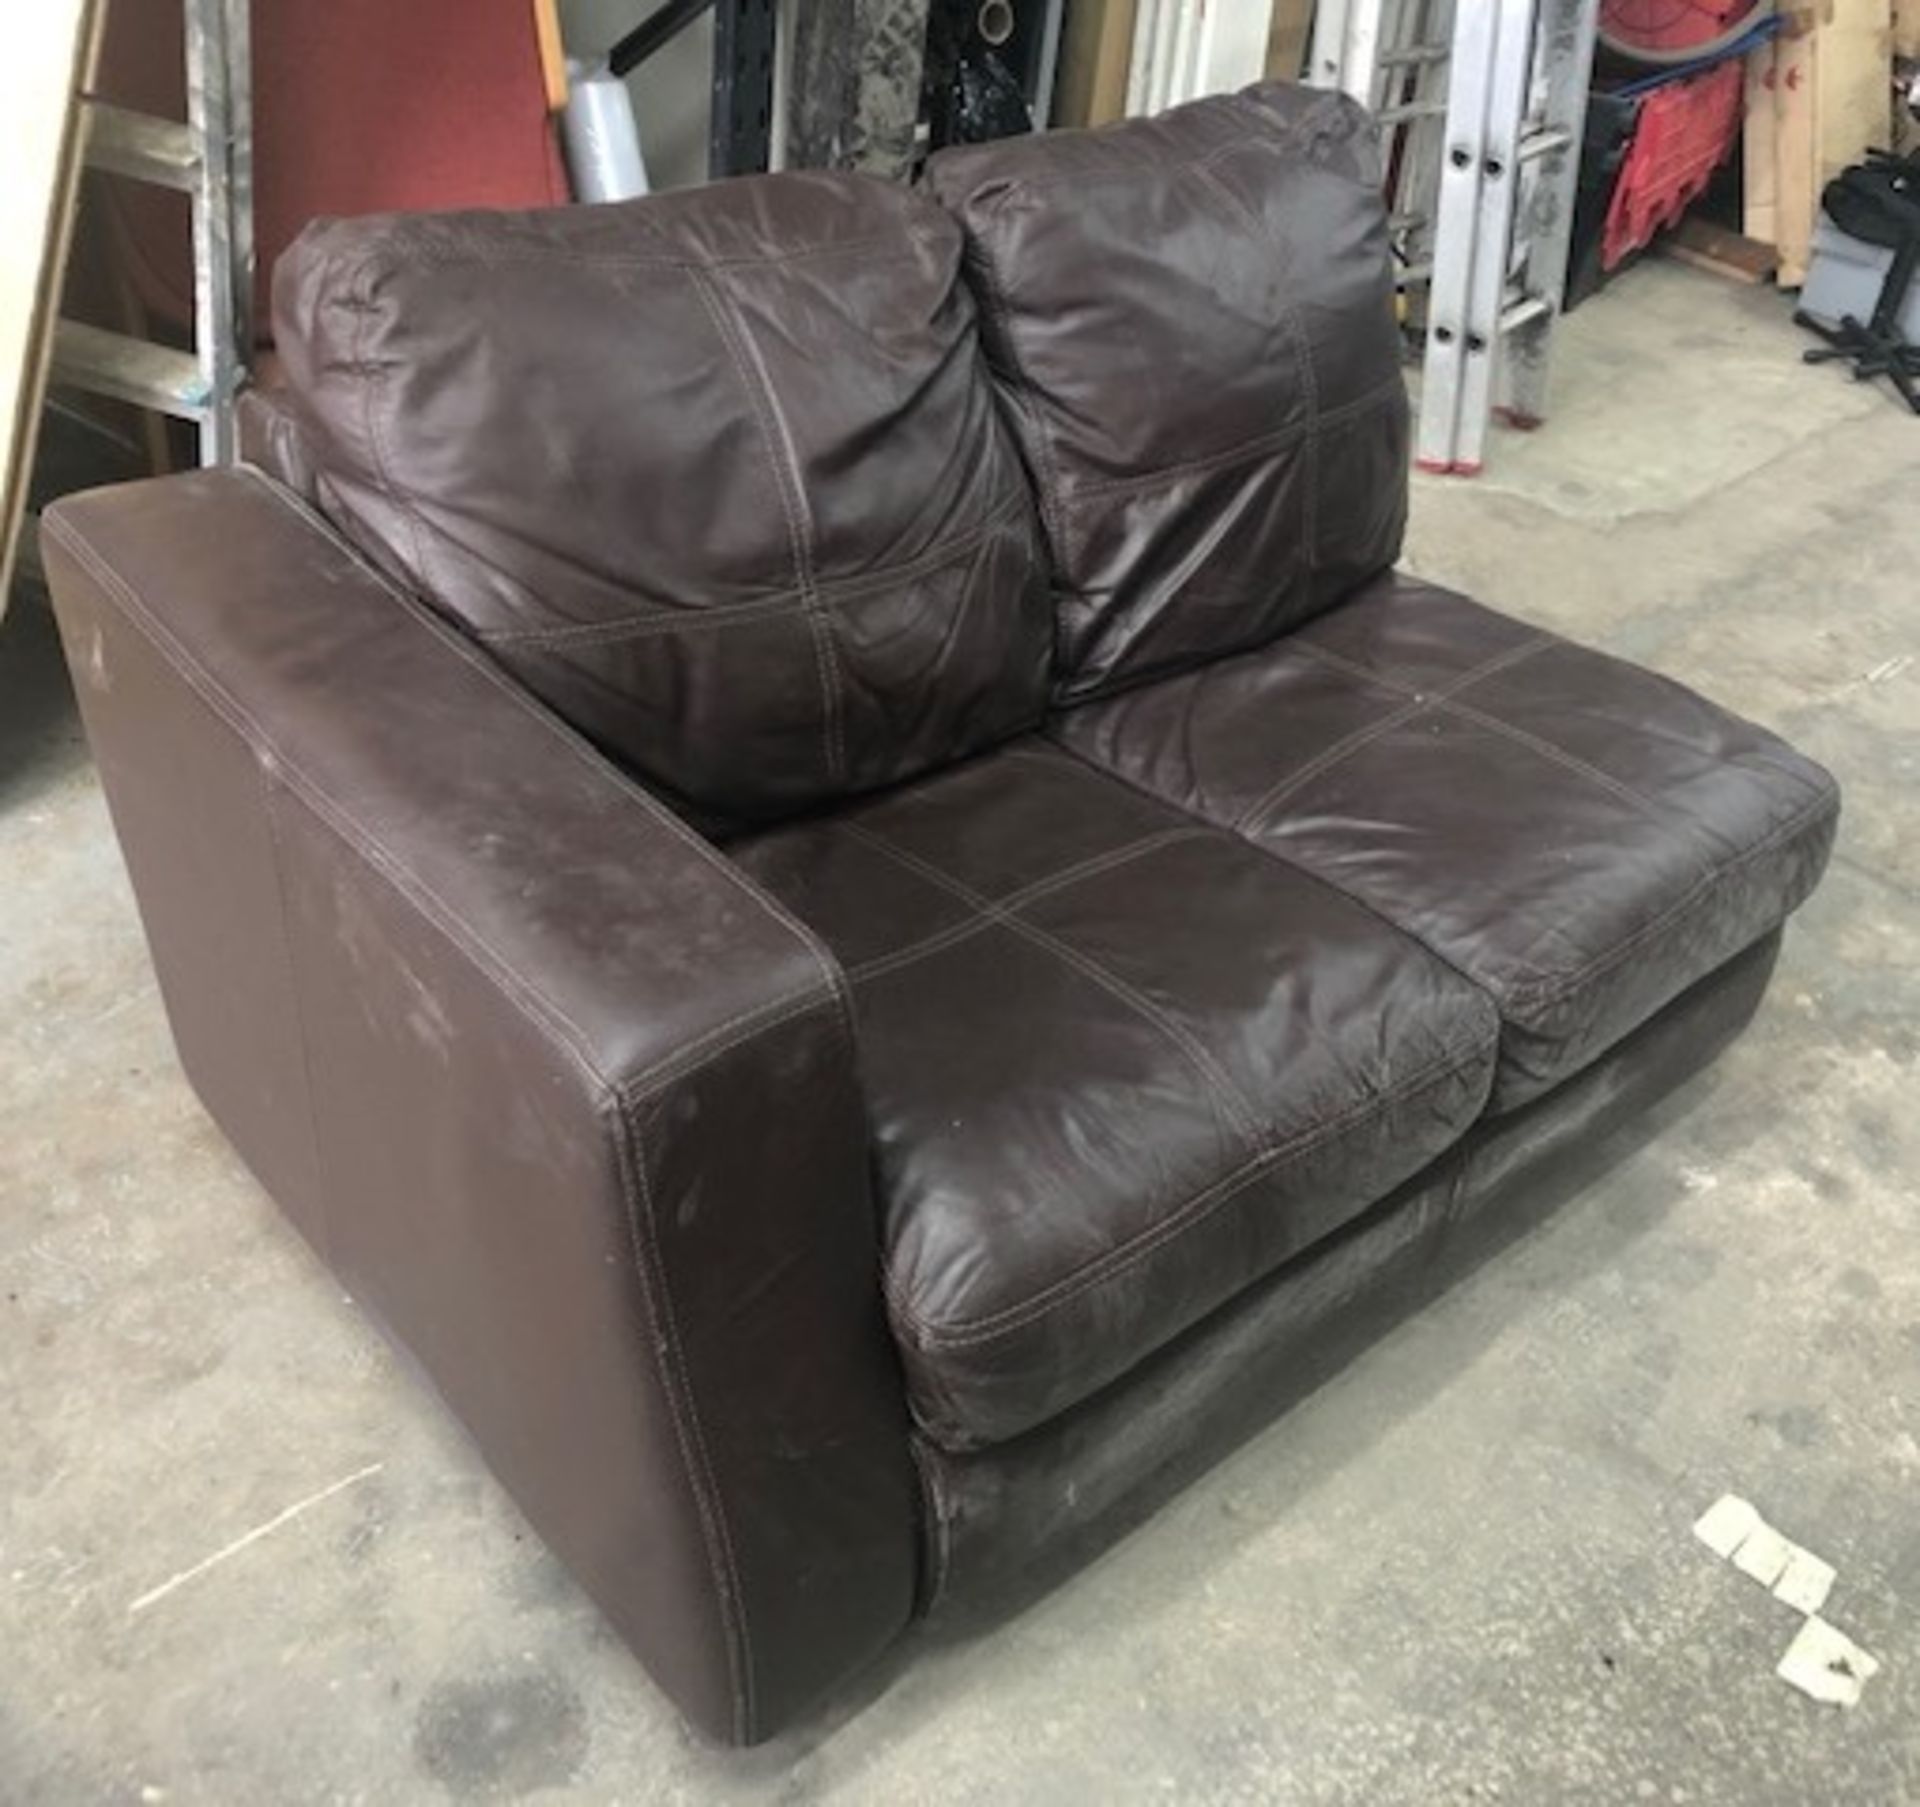 3 Seater Faux Leather Corner Couch in Brown - Image 3 of 3